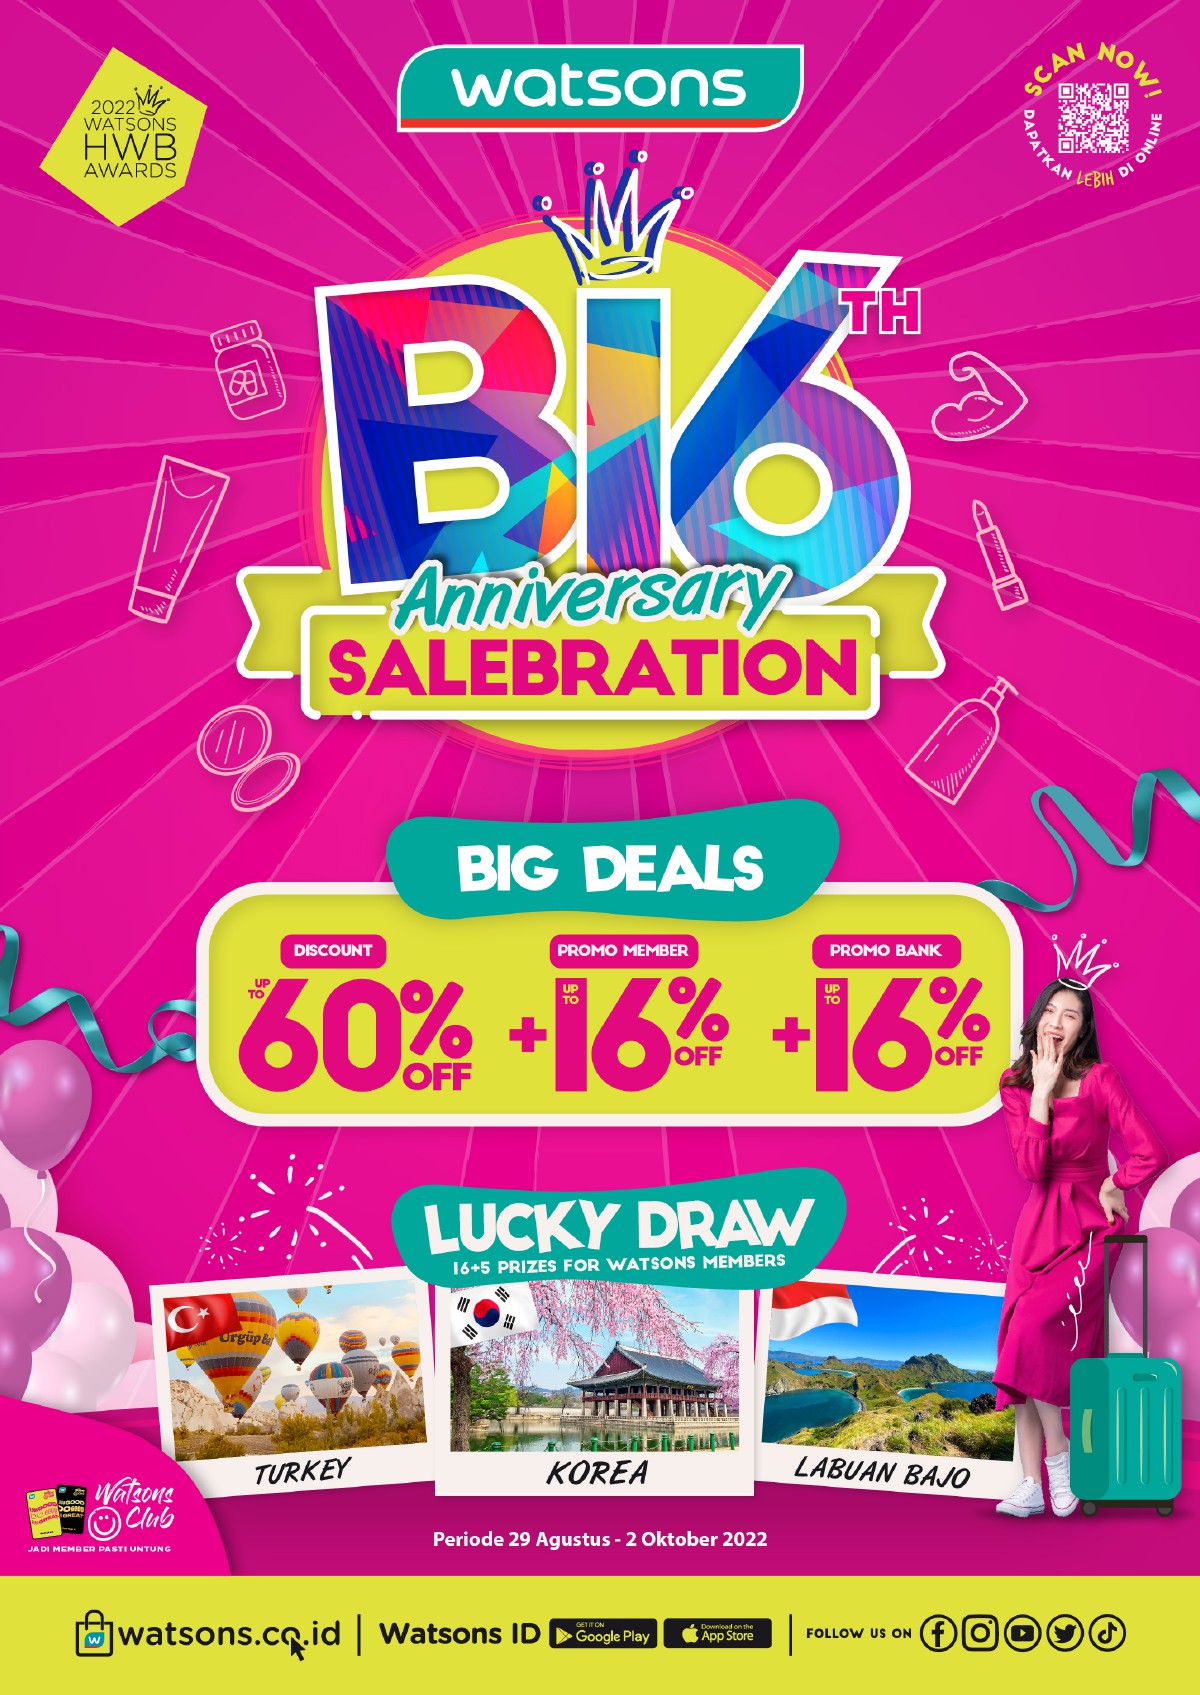 Katalog Belanja Watsons Terbaru - 16th ANNIVERSARY | Discount Up to 60% on your favorite products